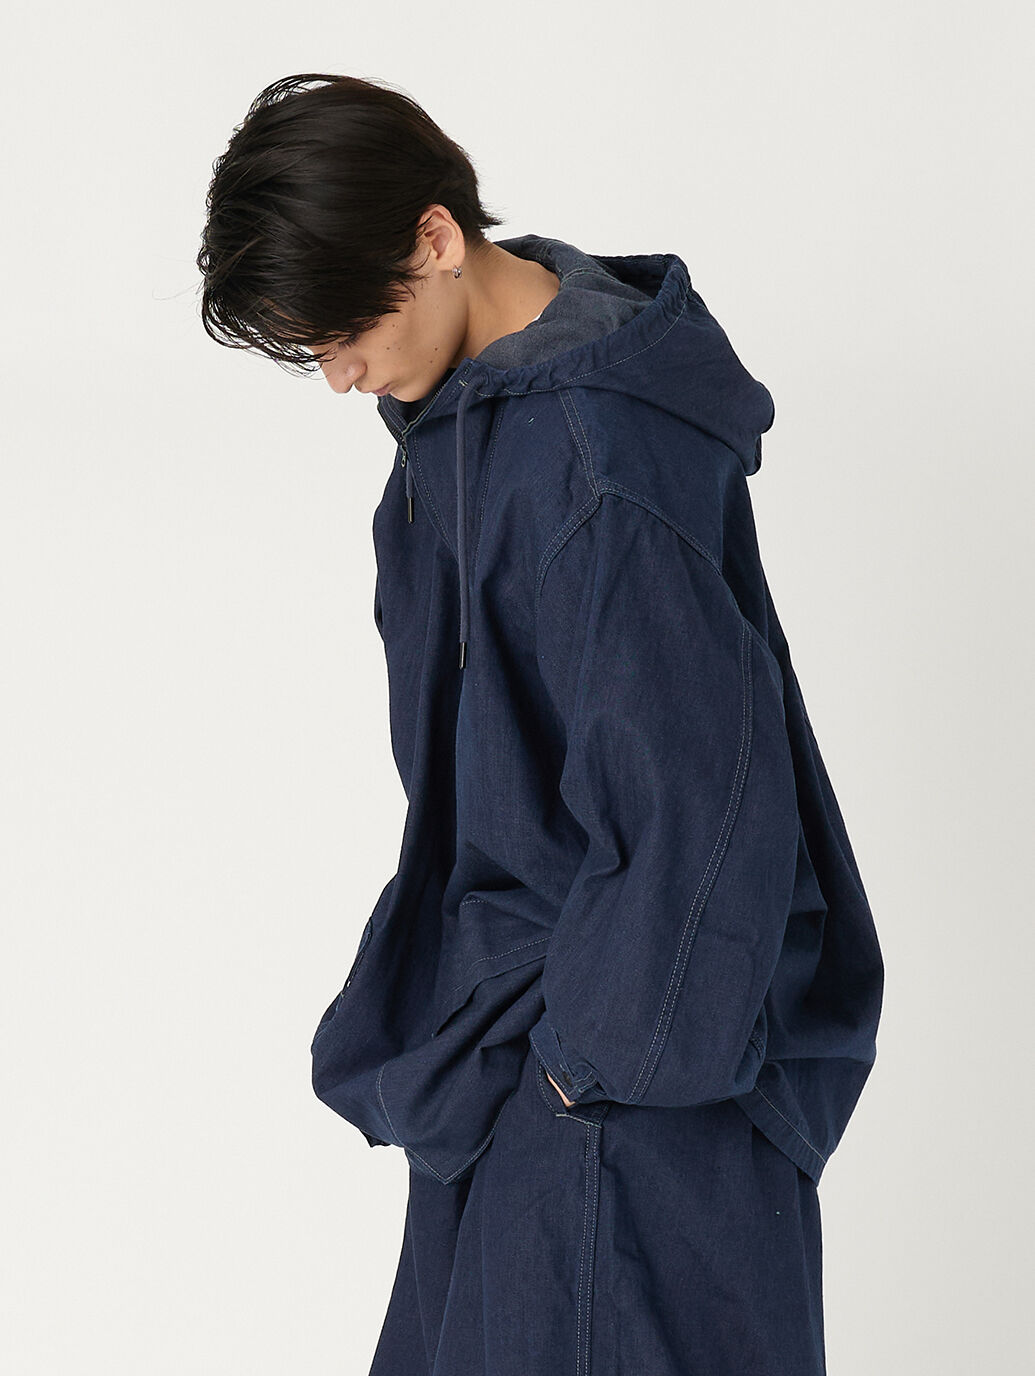 Levi's® Denim FamilyBY LEVI'S® MADE&CRAFTED® ショートパーカー 